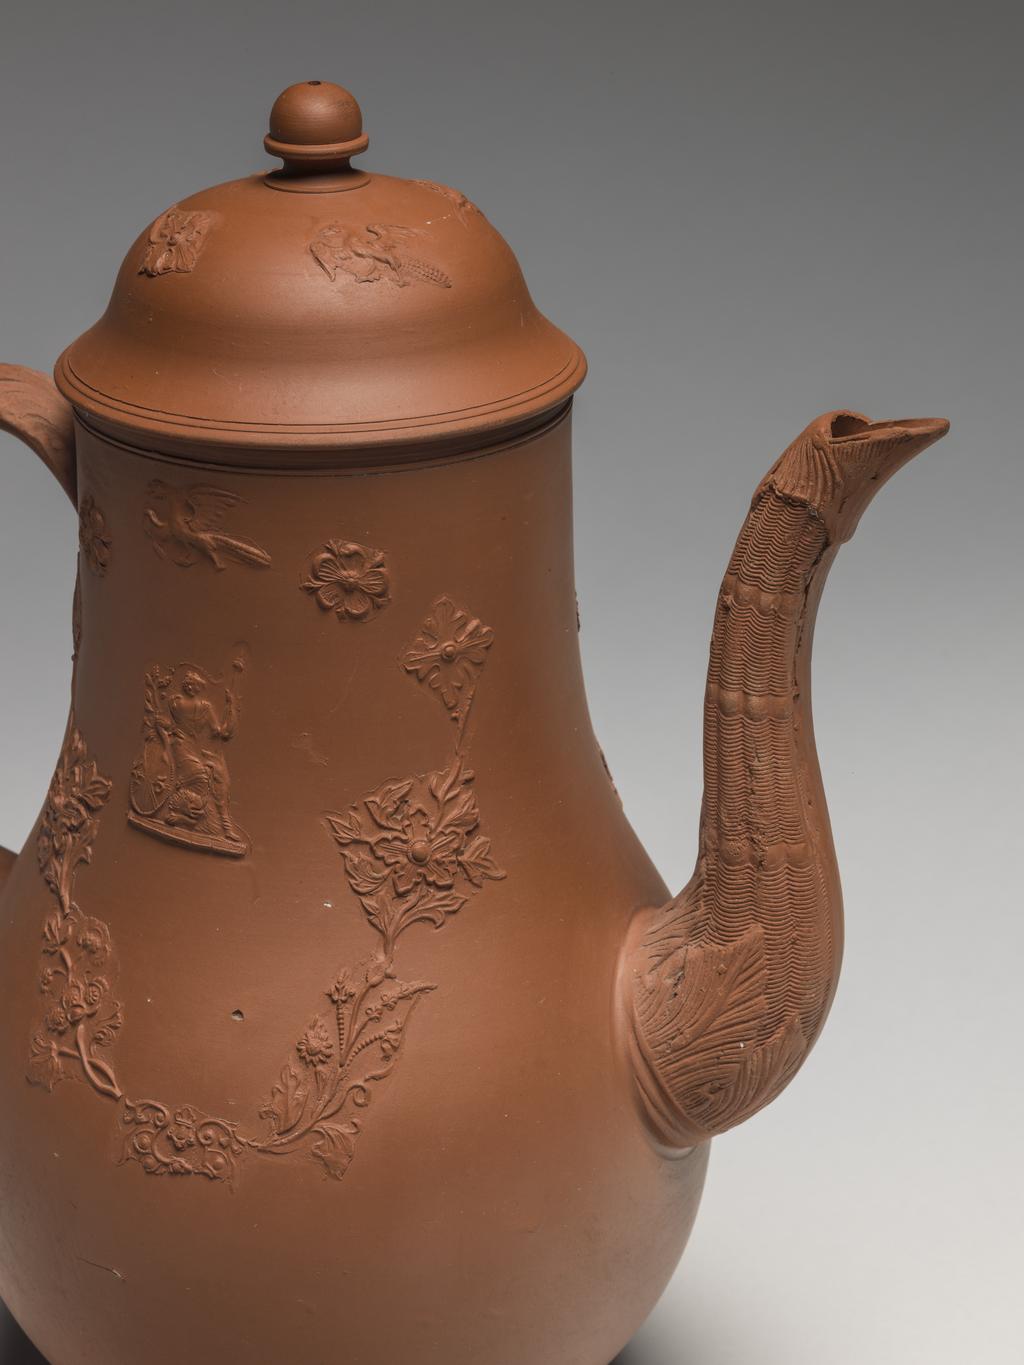 An image of Coffee pot and cover. Unknown Staffordshire factory. The body thrown, with applied moulded handle and spout, and mould applied sprigging. The pot is pear-shaped with a long curved spout moulded with wicker pattern and foliage, and a loop handle. One side is decorated with a mould-applied figure of Britannia with lion and Union Jack shield, on which is the number '45'; on the other side there is a grotesque Chinese figure seated under a parasol. Above both figures there is a flying bird, and below a festoon of mould applied stylized flowers and scrollwork. The domed cover is decorated with a similar bird and flowers, and has an acorn-shaped knob. Red dry-bodied stoneware, circa 1763-1765. Rococo.